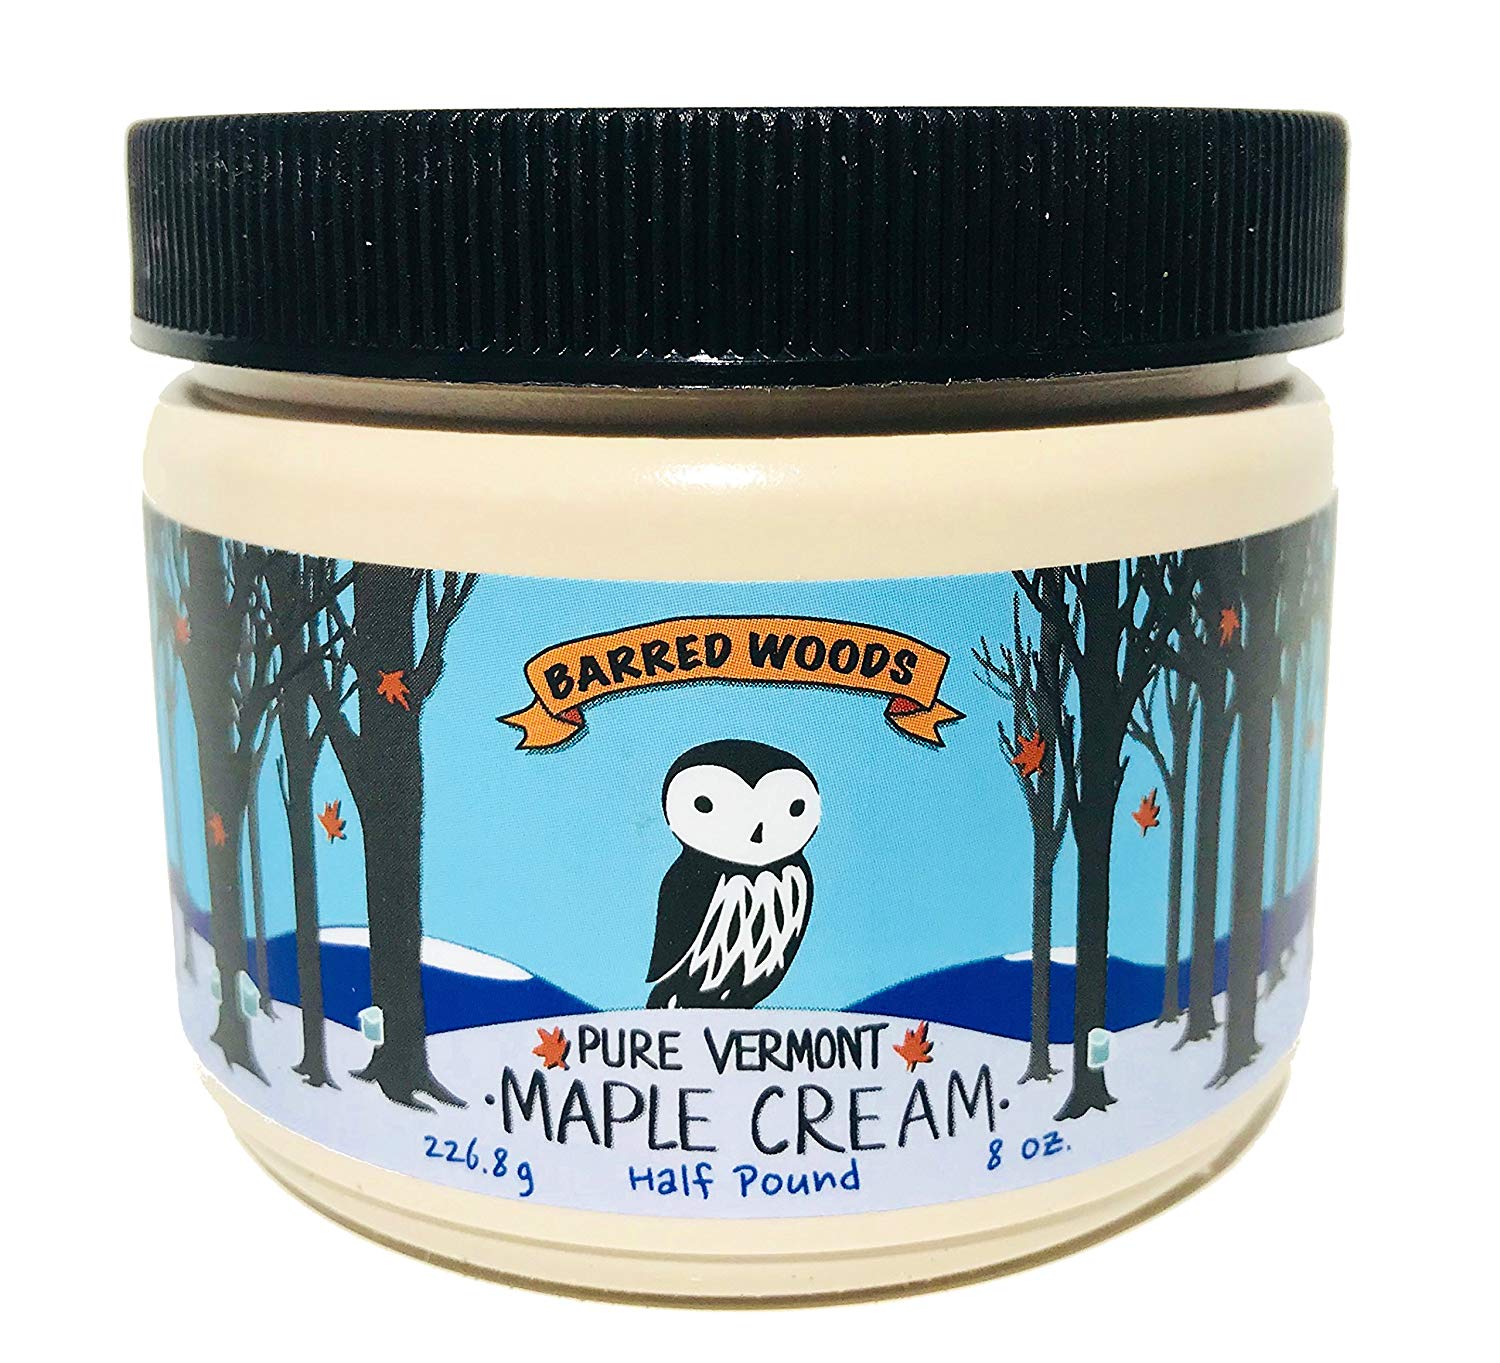 Pure Vermont Maple Cream from Barred Woods, $11.95 @amazon.com